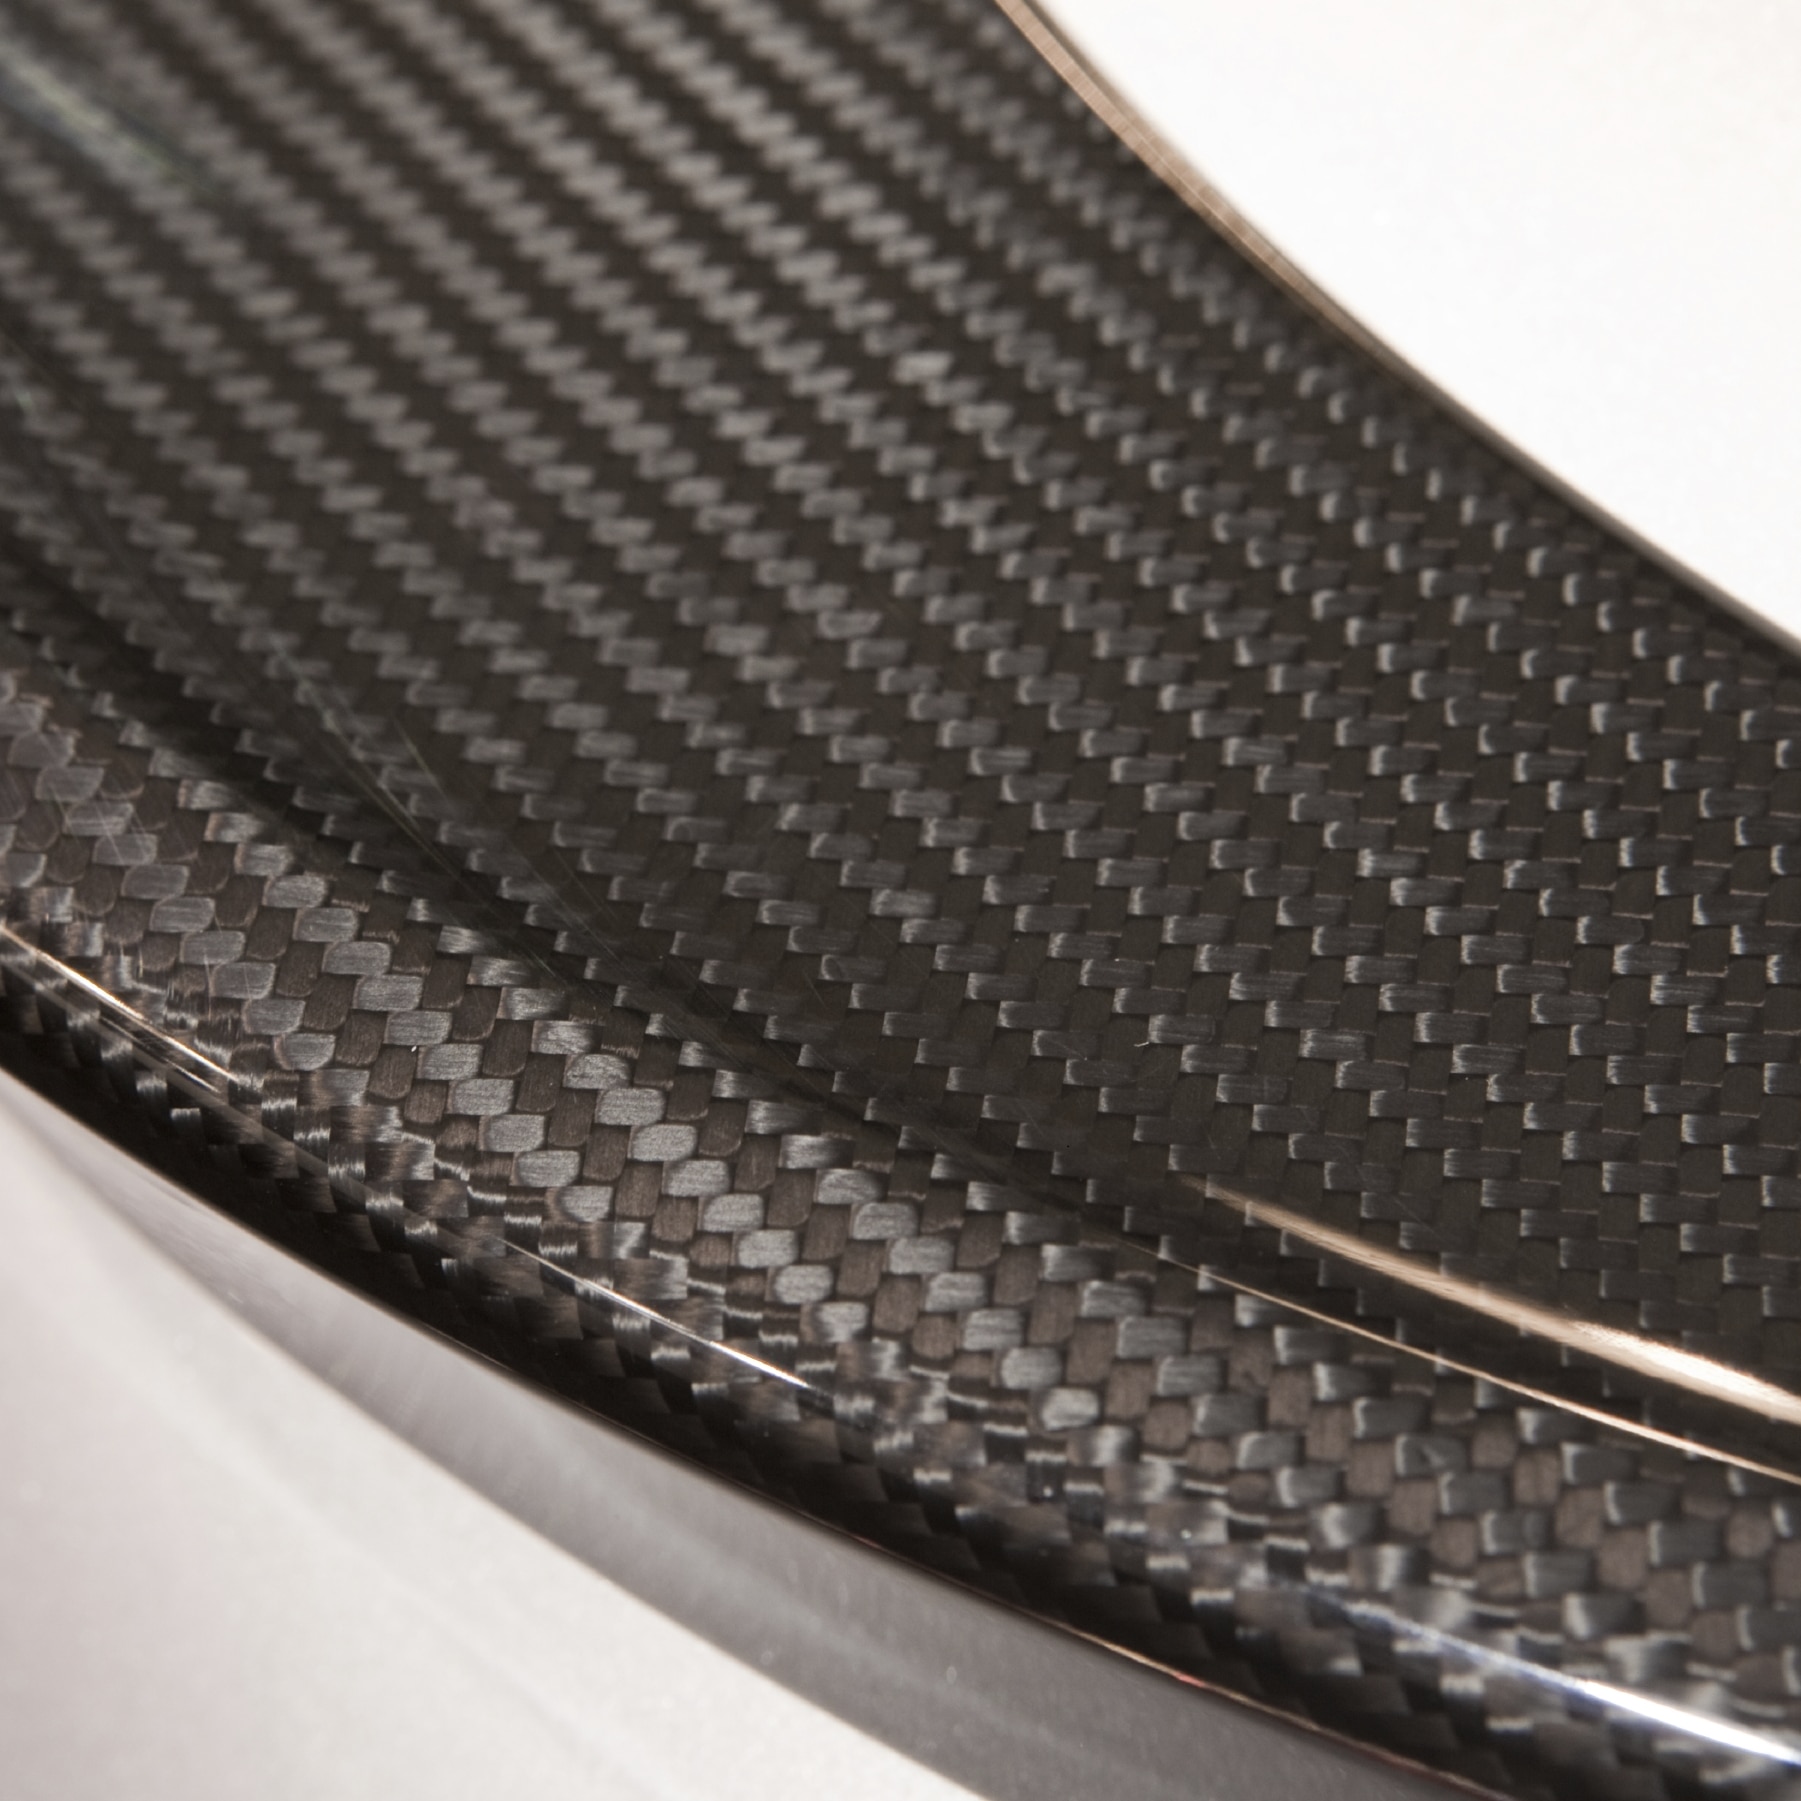 Detail of a carbon fiber molded element, with close up of the textured surface and pattern of the high technology material.